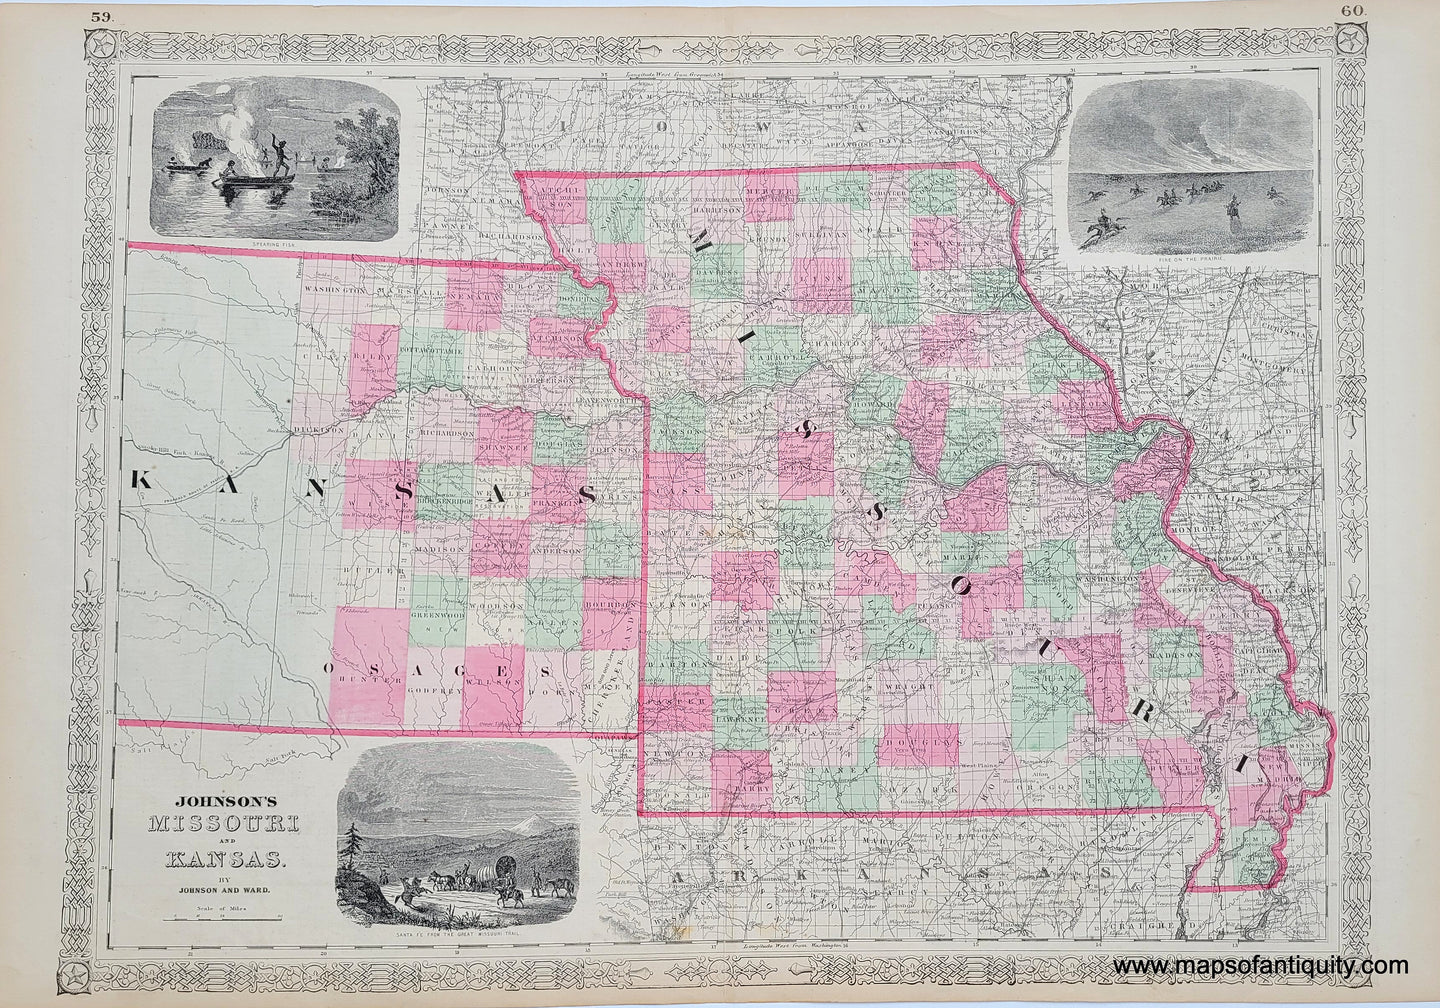 Antique-Hand-Colored-Map-Johnson's-Missouri-and-Kansas-United-States-Midwest-1864-Johnson-and-Ward-Maps-Of-Antiquity